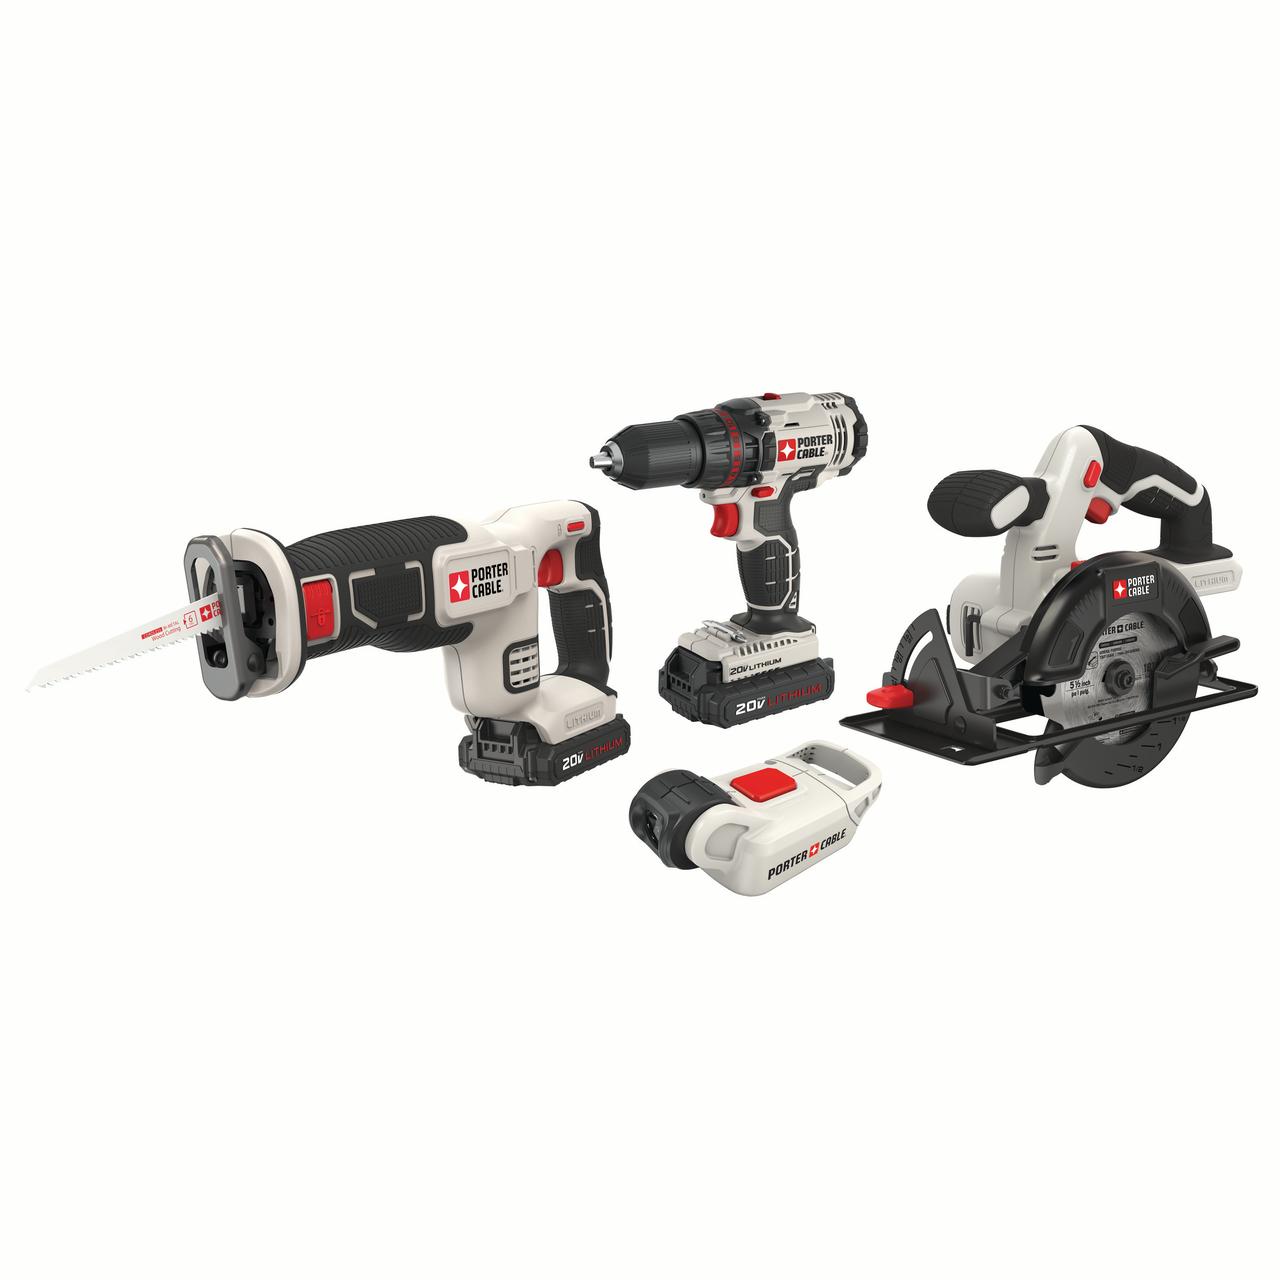 PORTER CABLE 20-Volt Max Lithium-Ion 4 Tool Combo Kit, PCCK616L4 - image 2 of 7